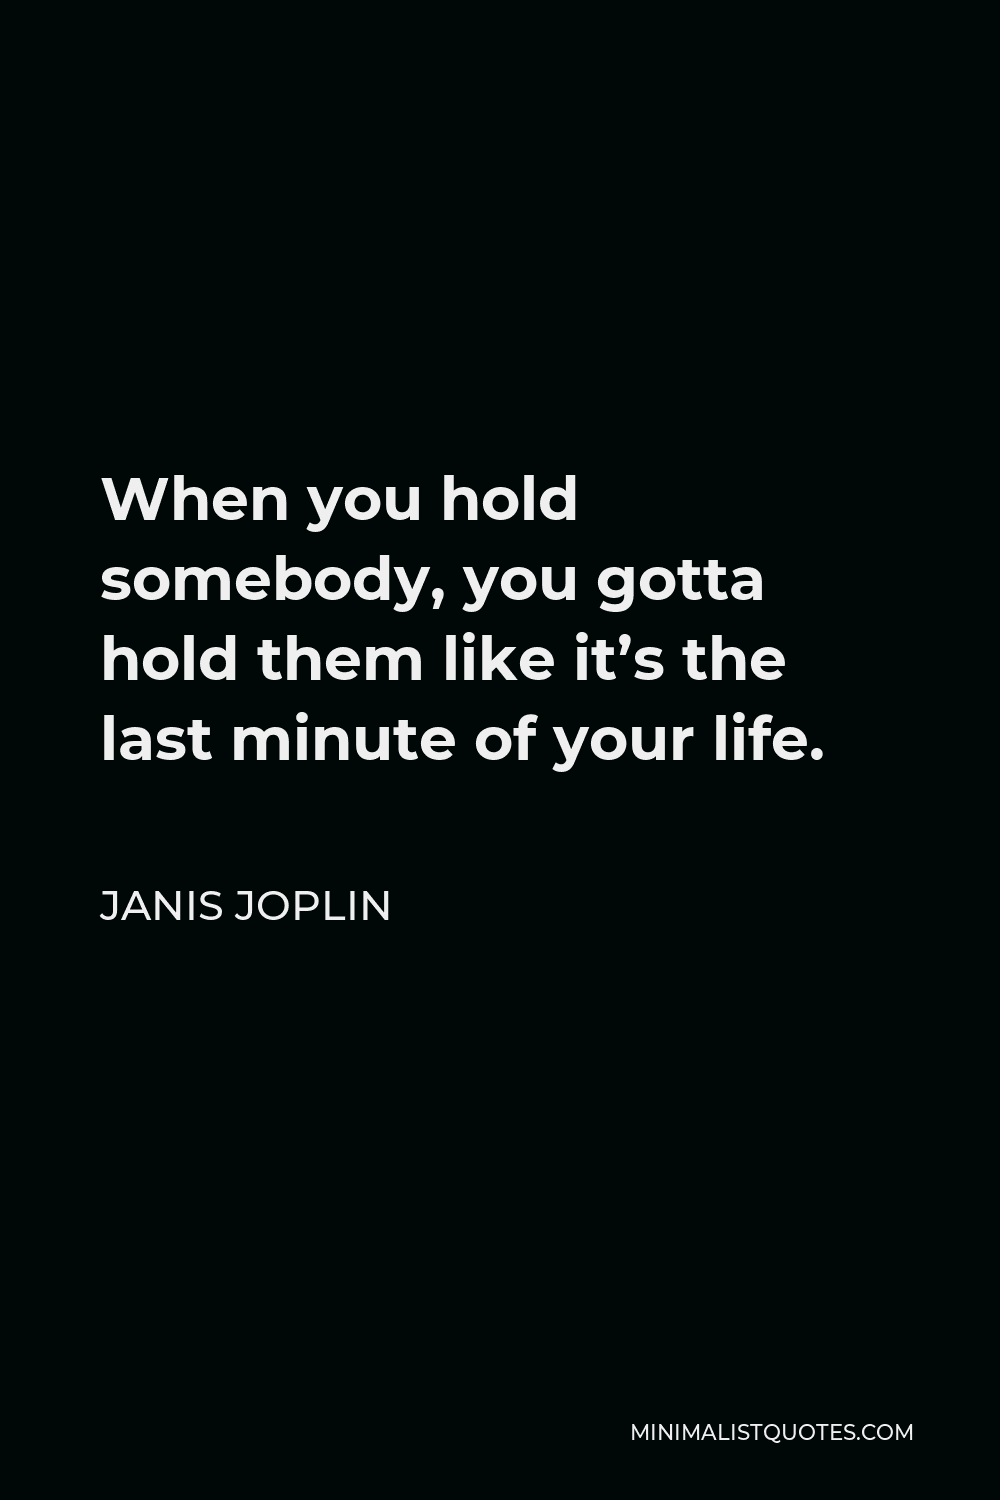 Janis Joplin Quote - When you hold somebody, you gotta hold them like it’s the last minute of your life.